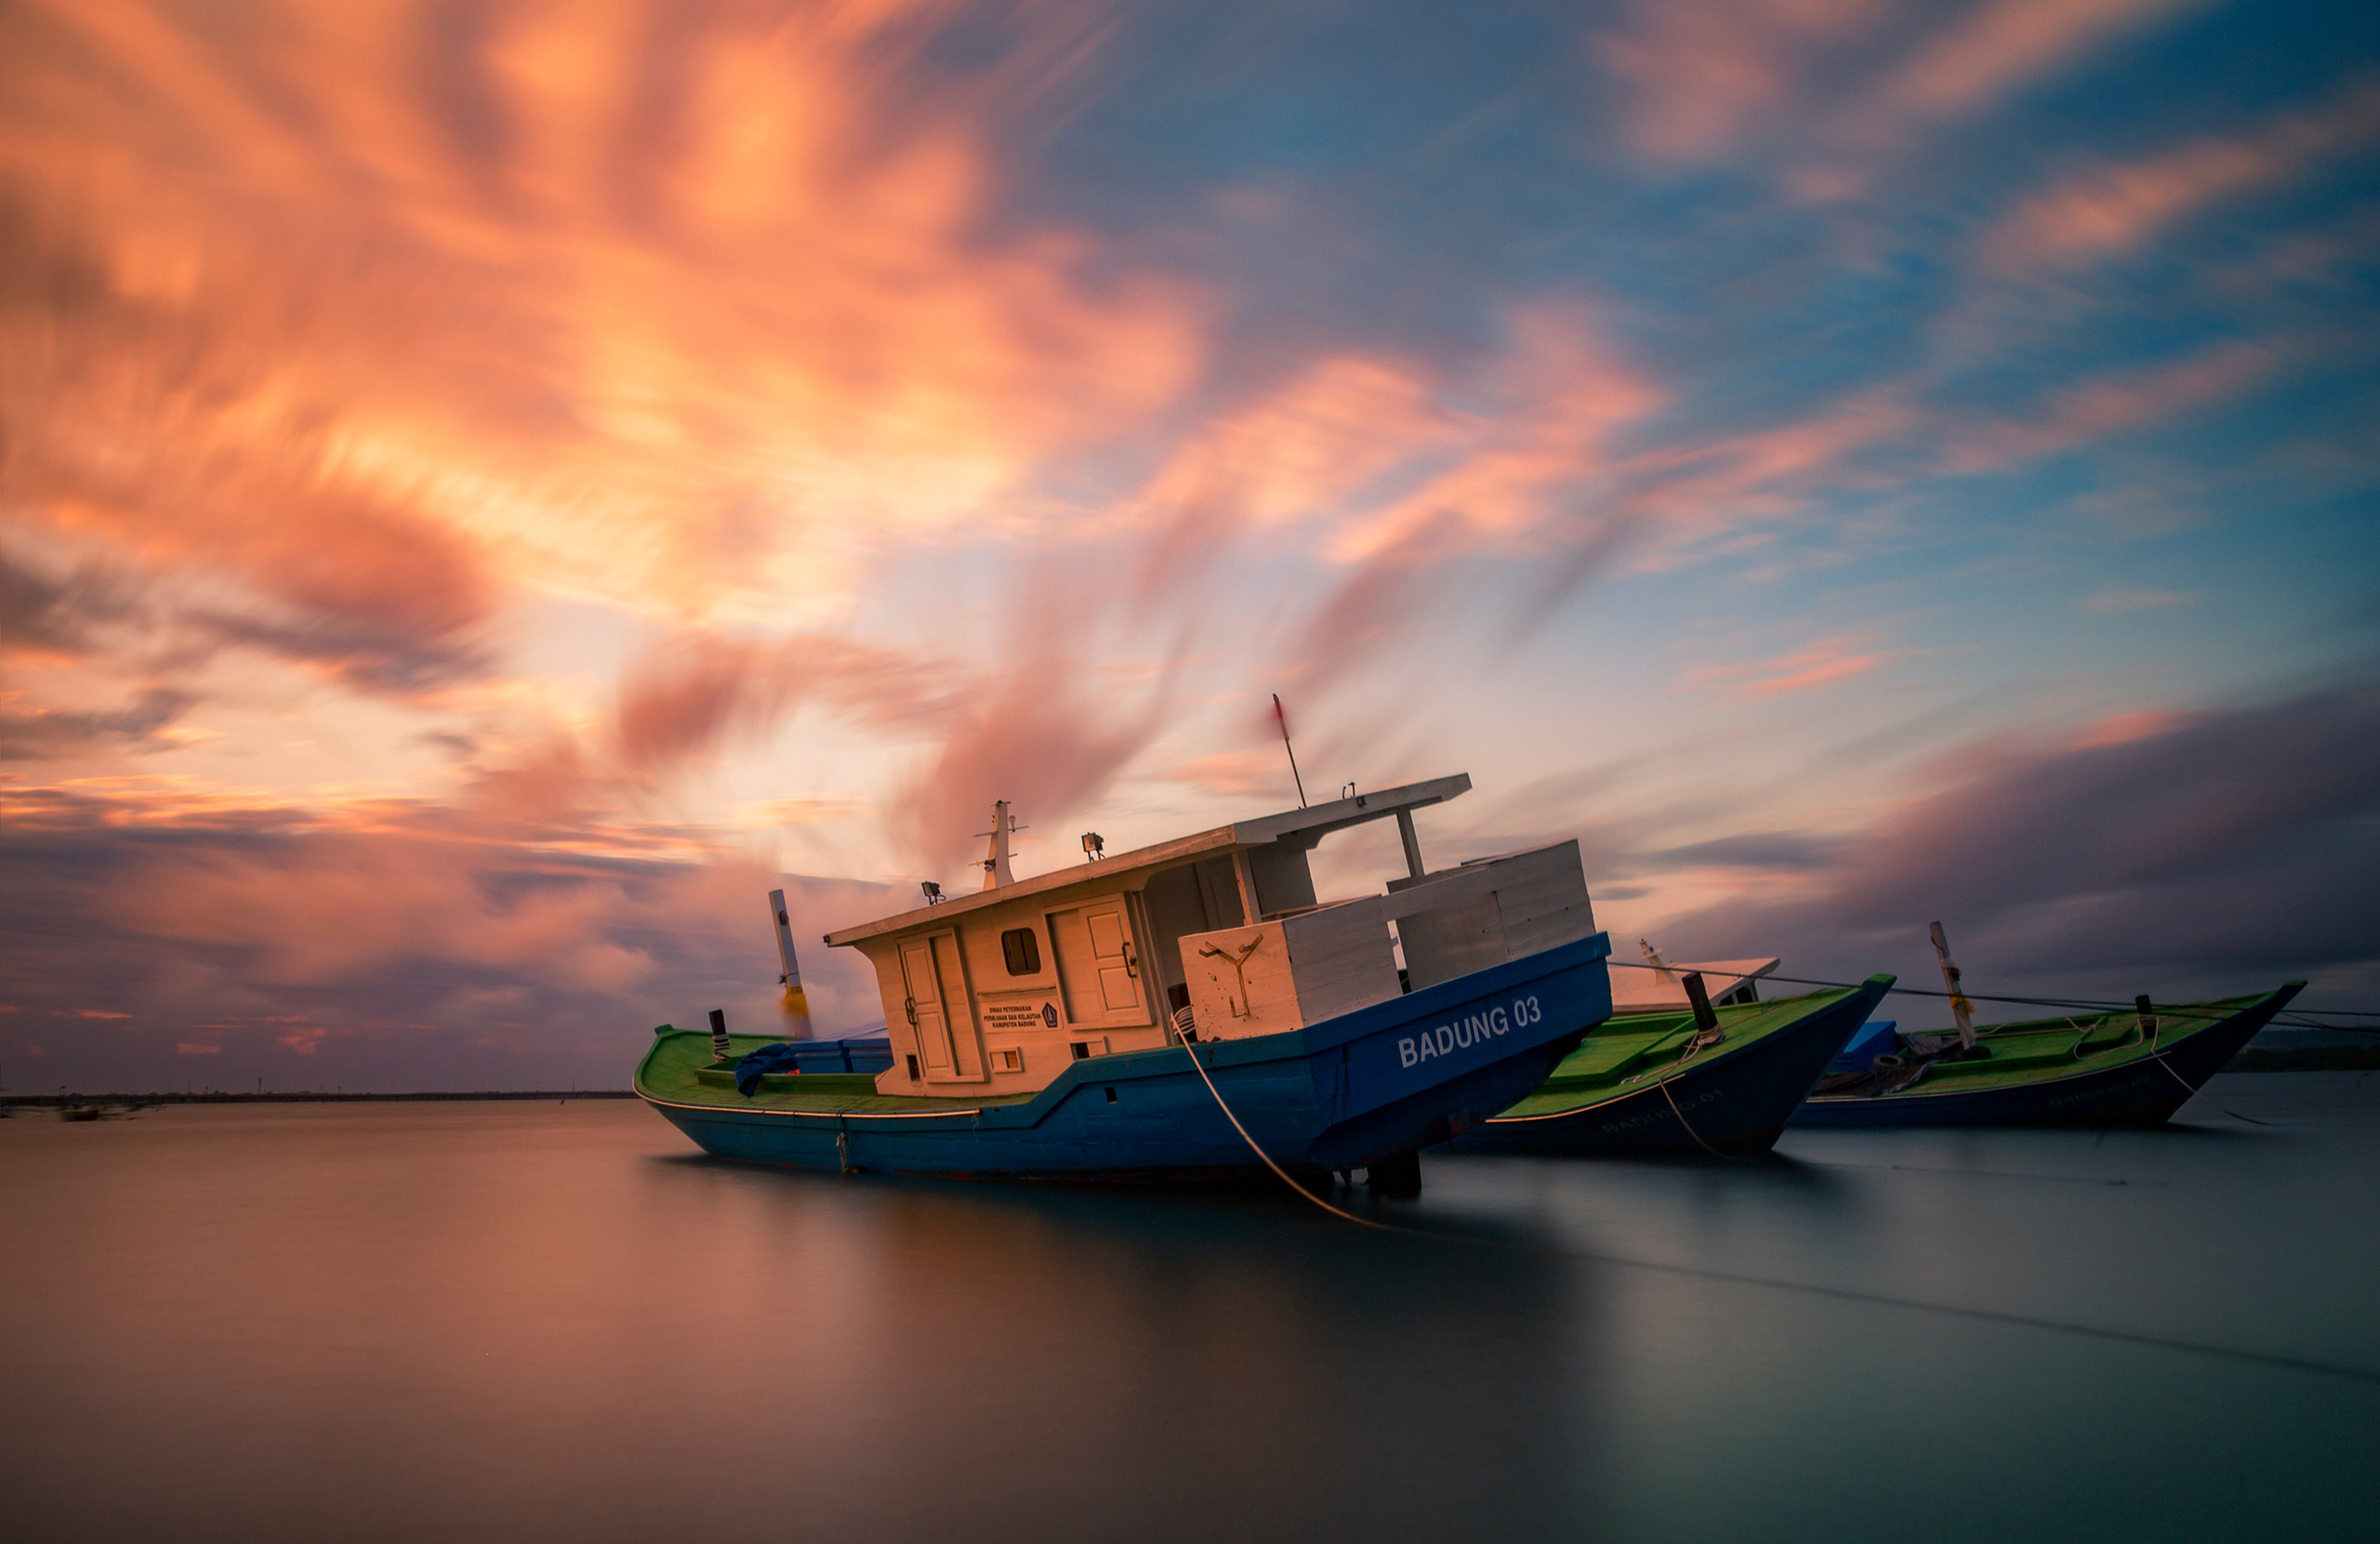 General 2560x1661 sea nature clouds sky water sunset sunset glow boat